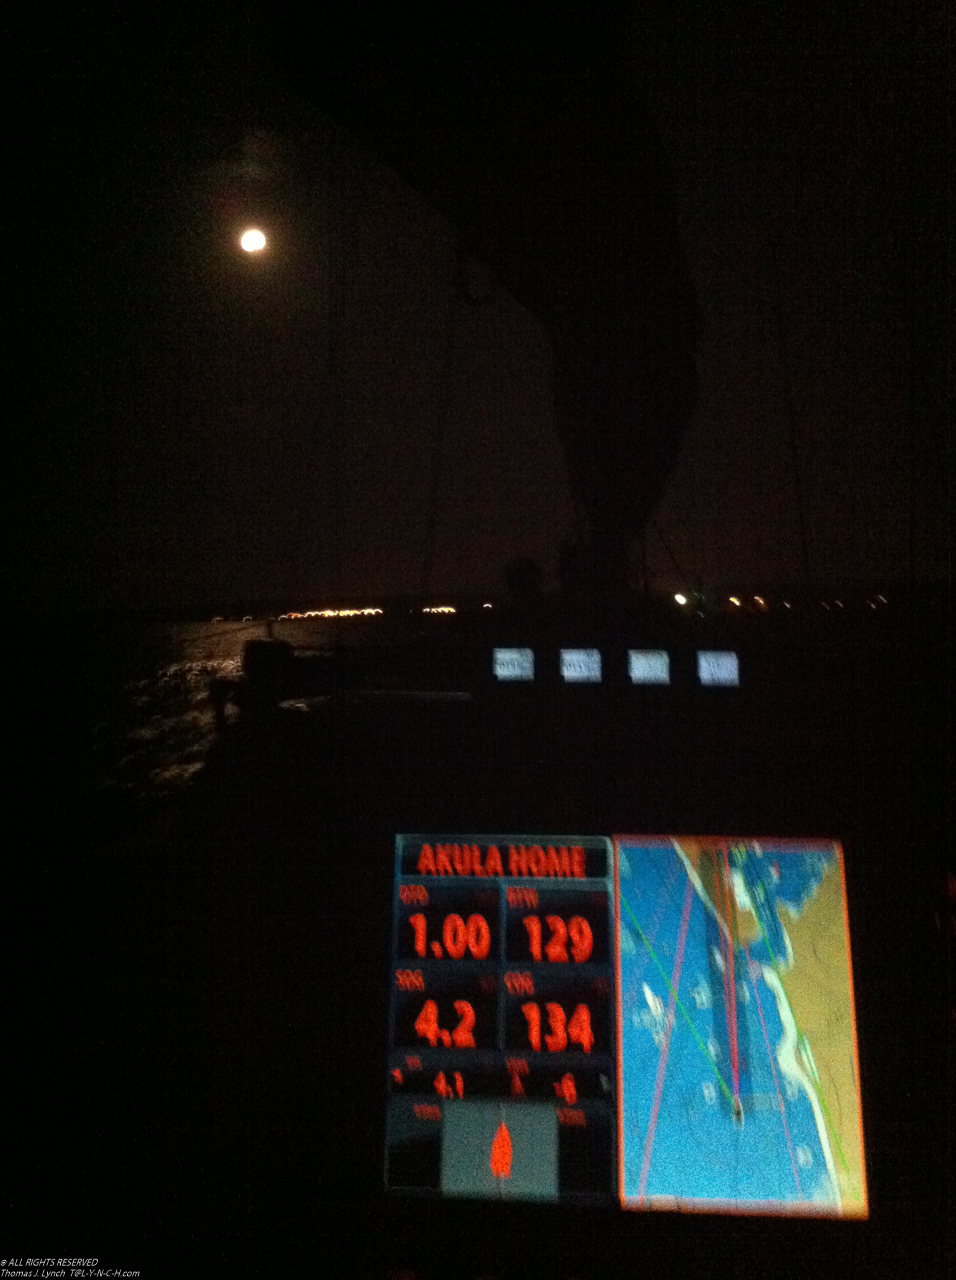 Akula returning to home port under a full moon  ~~  